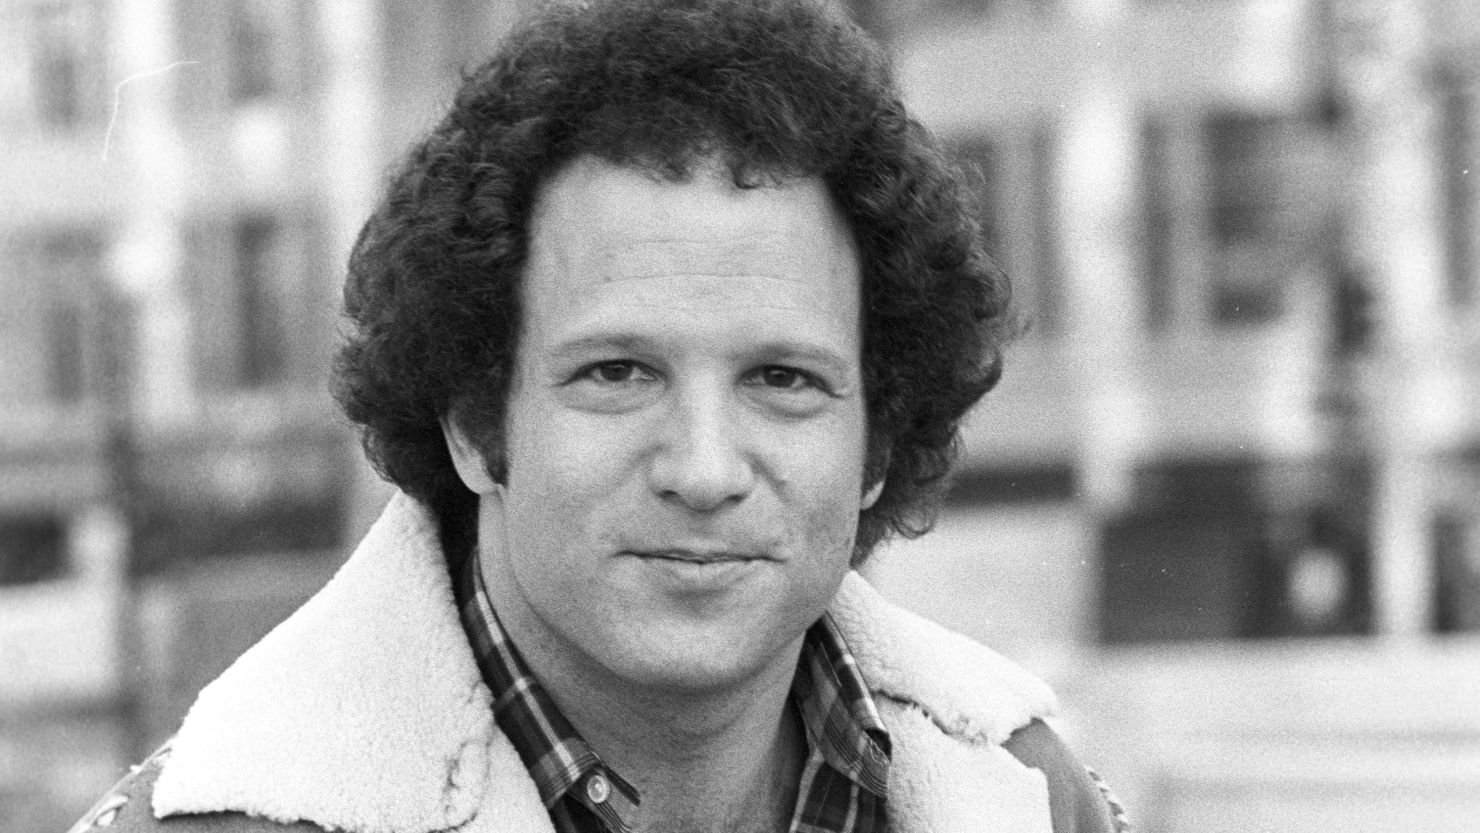 Portrait of American actor Albert Brooks on February 28, 1979. (Photo by Fairchild Archive/Penske Media via Getty Images)